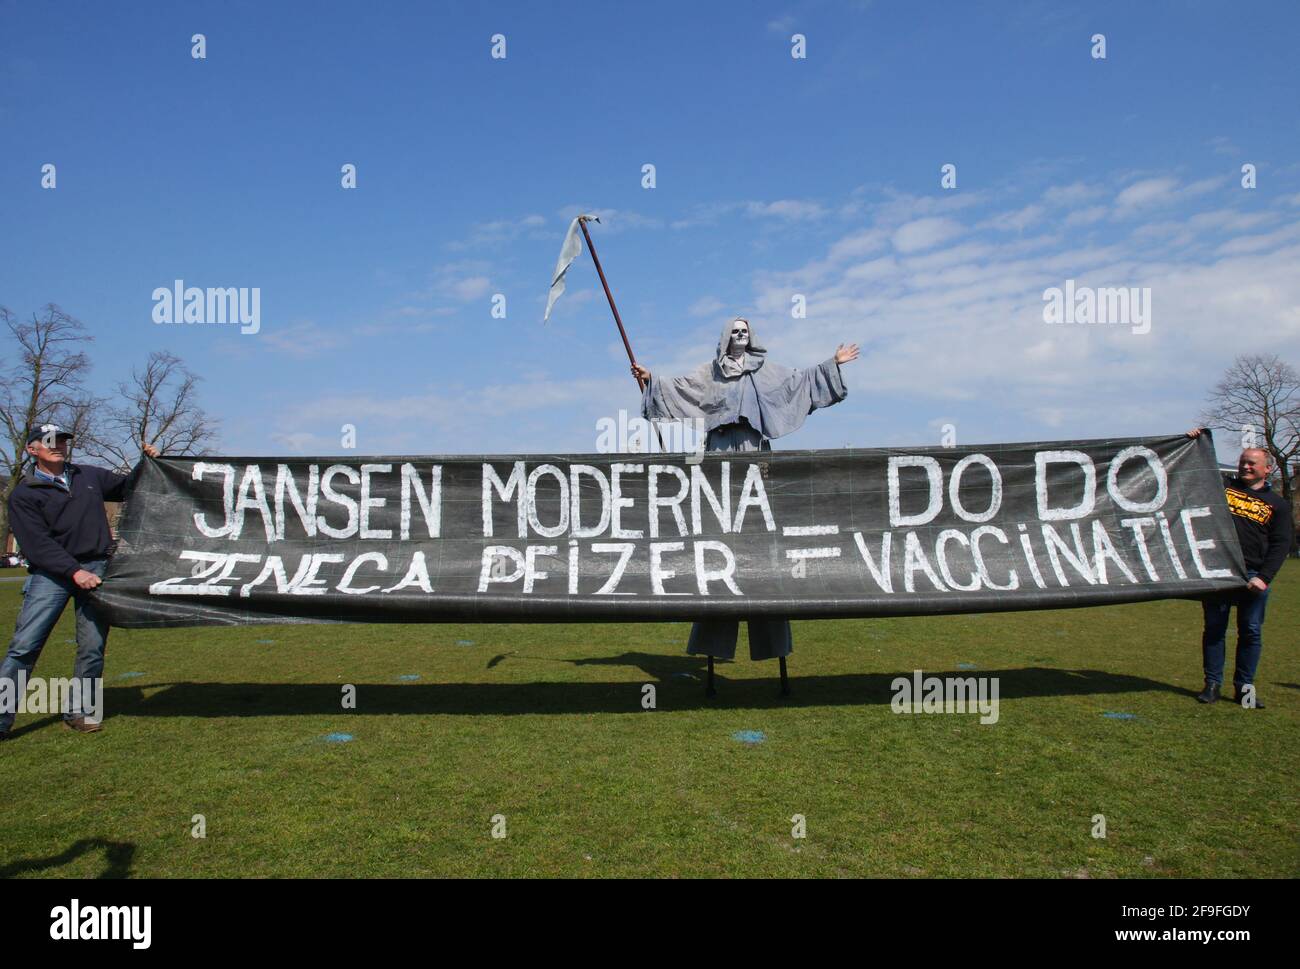 Anti-lockdown protester dressed as the grim reaper stand near a banner with sign coronavirus anti-vaccination during an illegal demonstration against coronavirus measures at the Muaeumplein on April 18, 2021 in Amsterdam,Netherlands. (Photo by Paulo Amorim/Sipa USA) Stock Photo